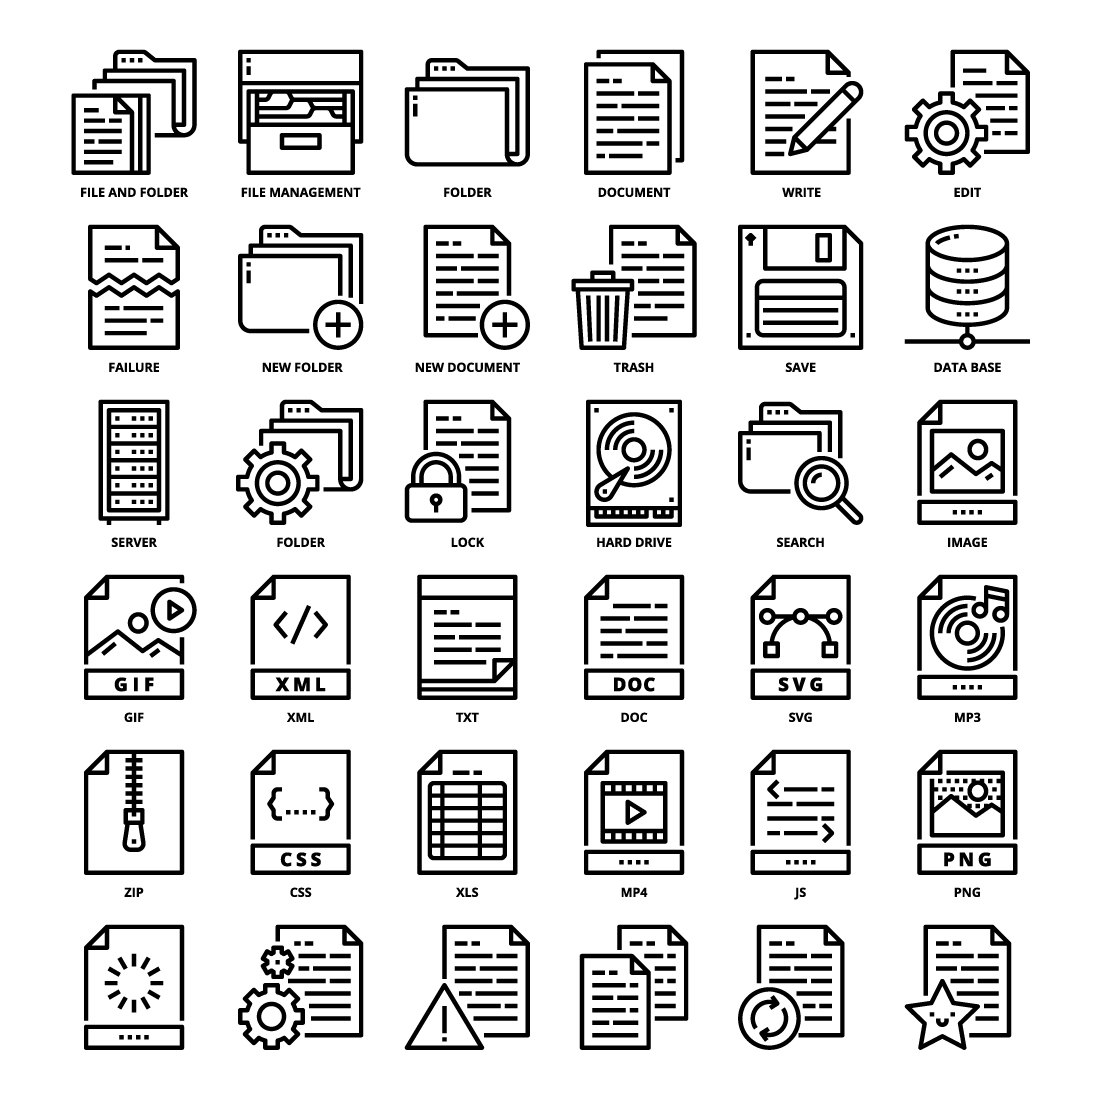 36 File and Folder Icons Set x 4 Styles preview image.